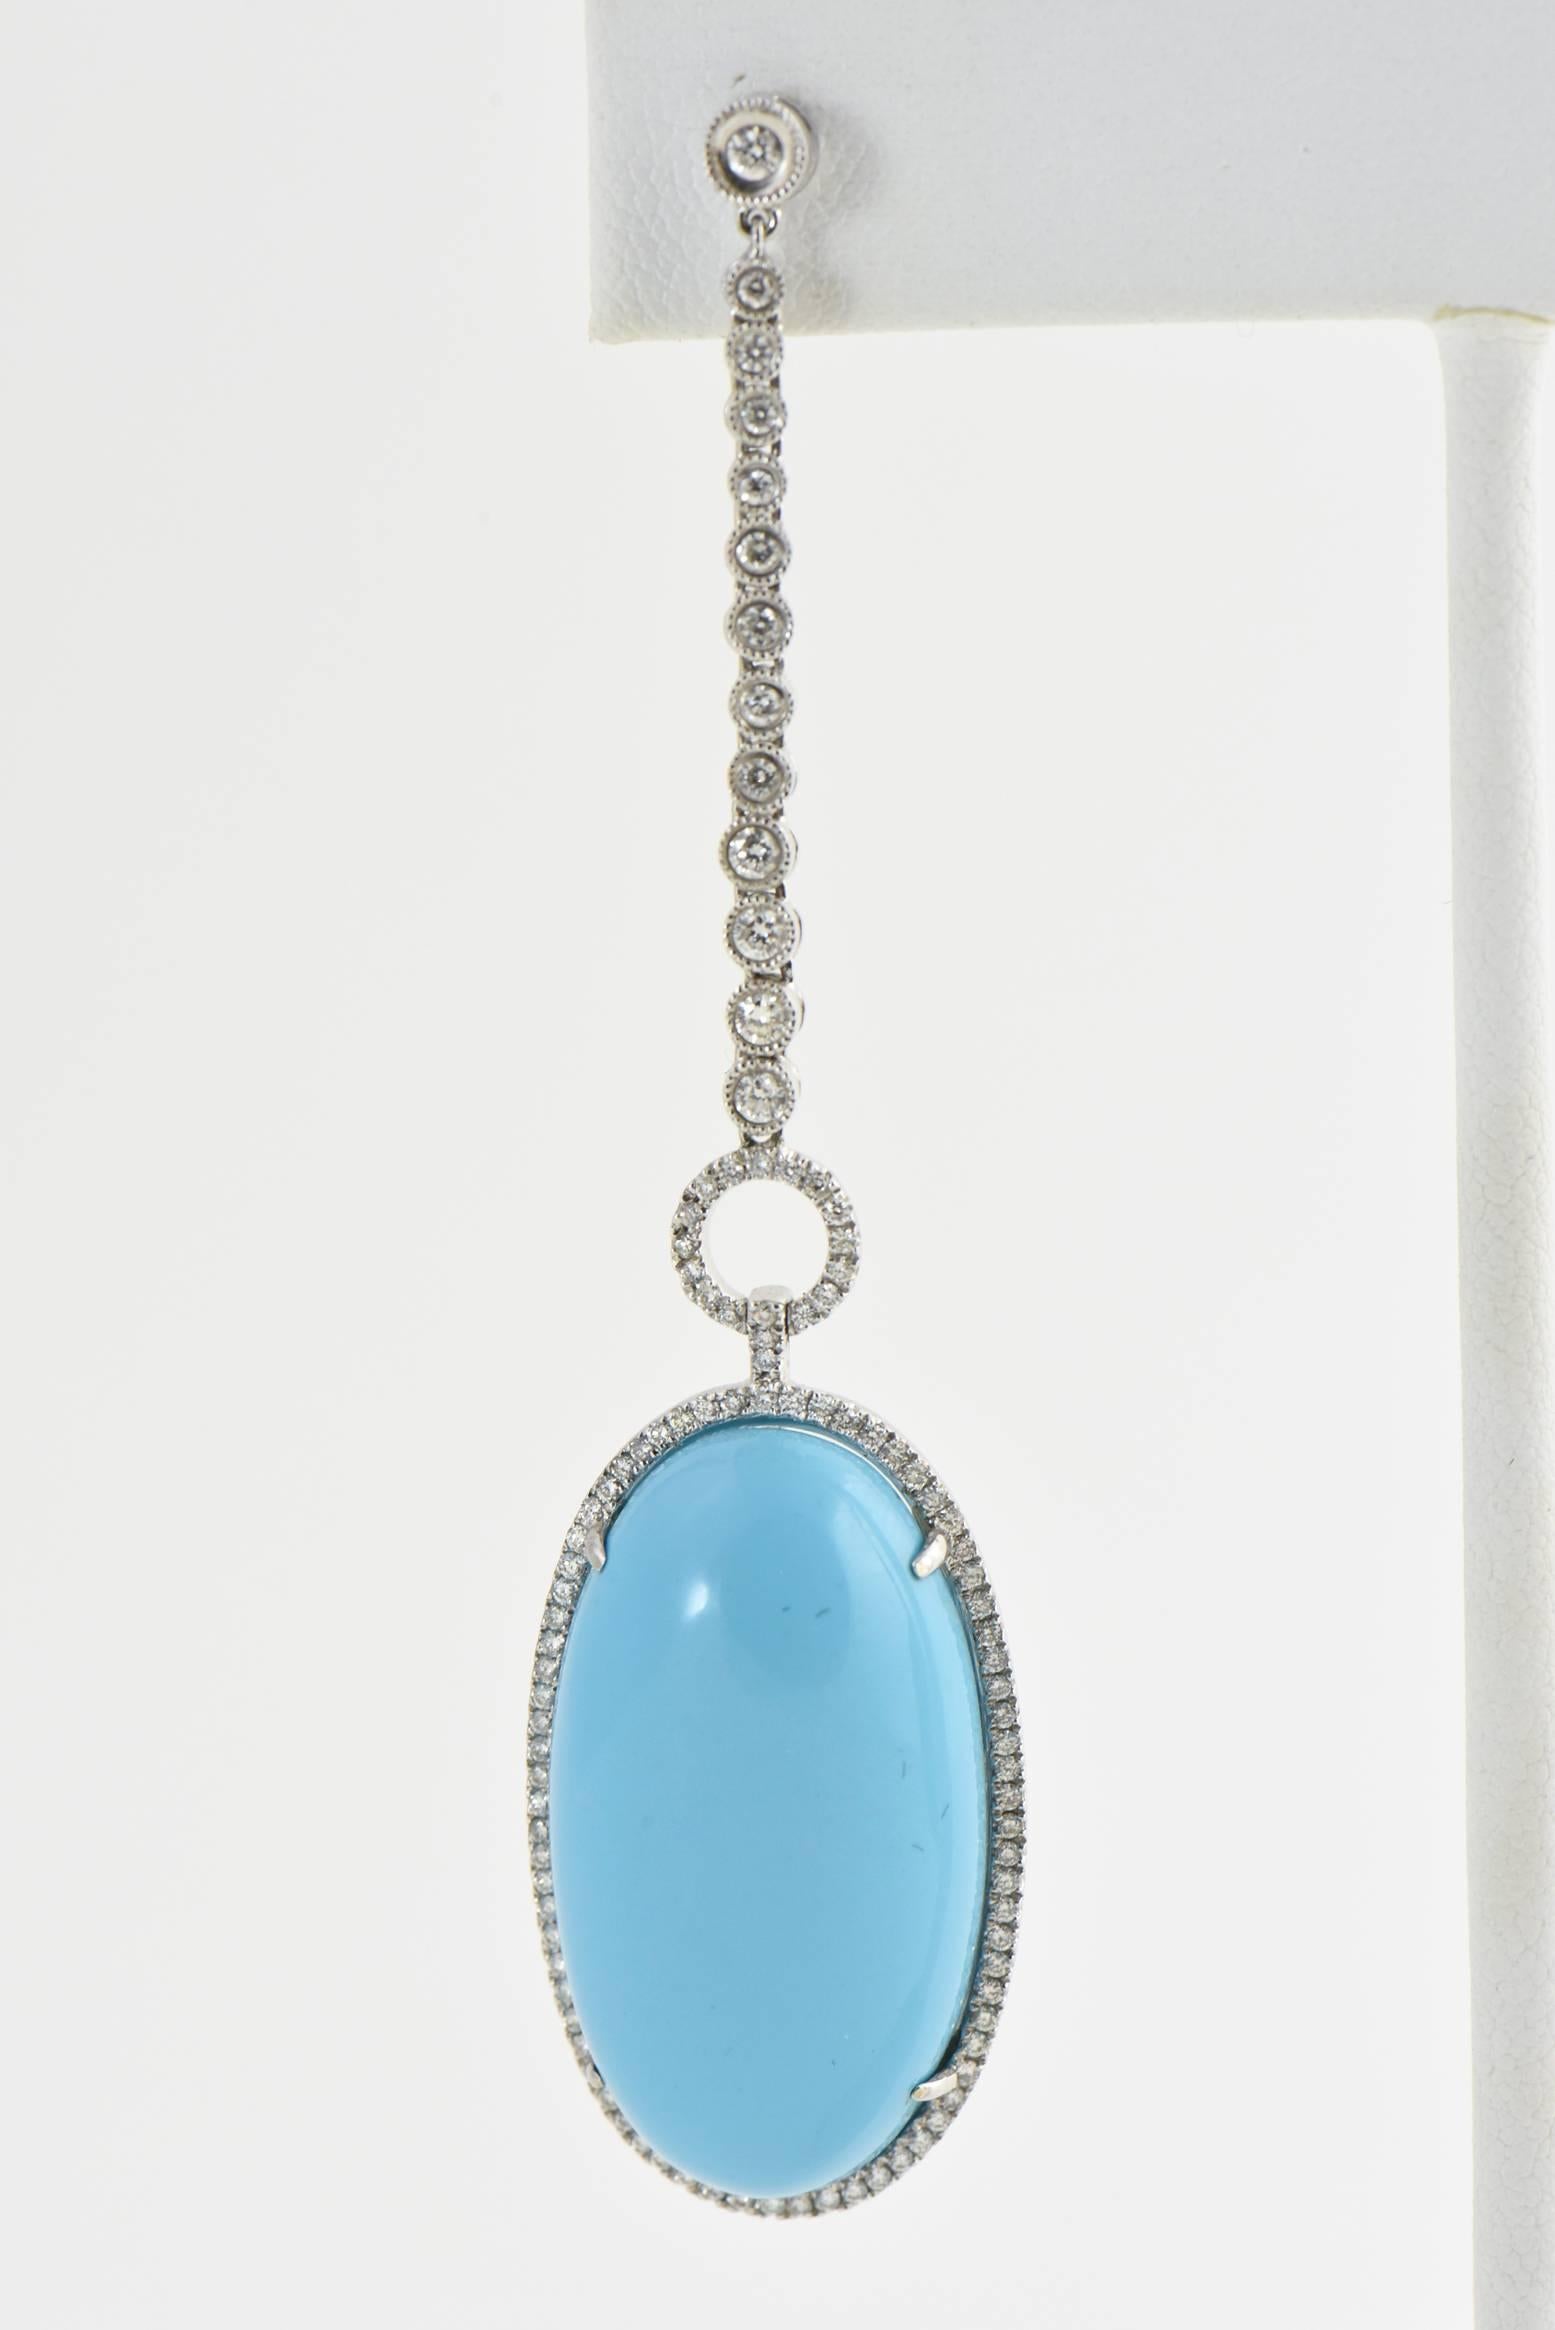 Featuring 2 large oval cabochon pieces of reconstituted turquoise mounted in diamond frames that are attached to a diamond ring that hangs from 12 graduating in size diamonds in a beaded bezel mount that attaches to a matching small diamond stud. 